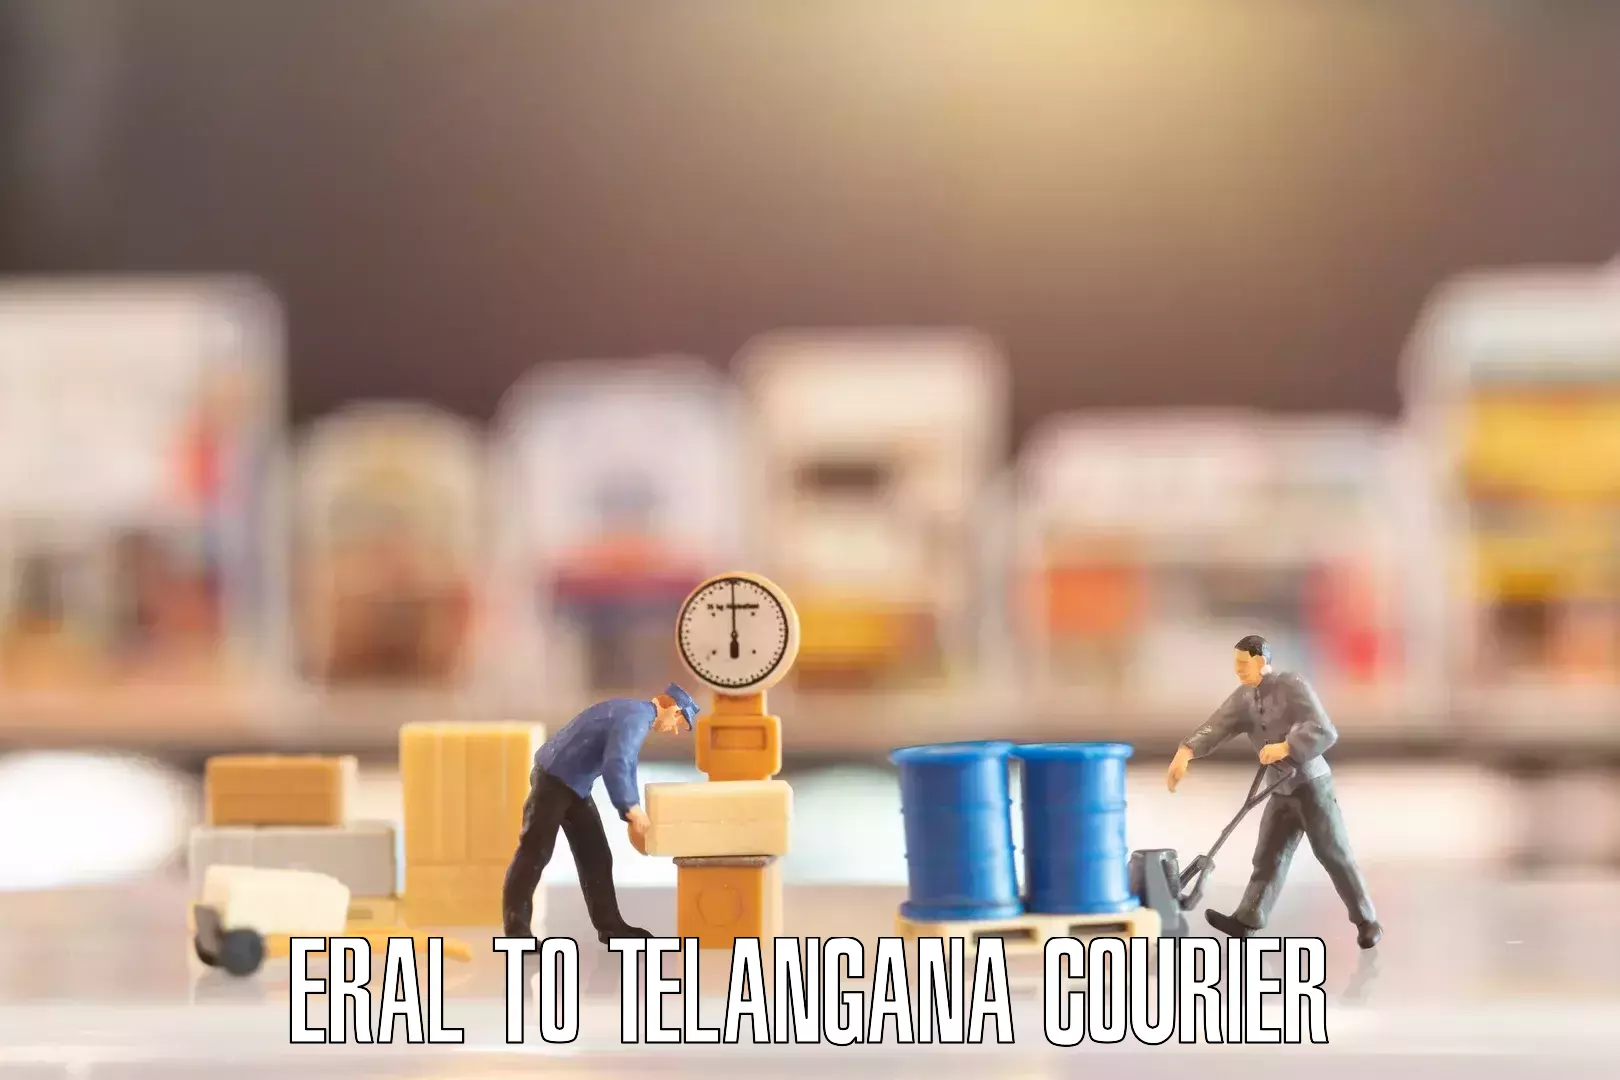 Affordable relocation services in Eral to Telangana